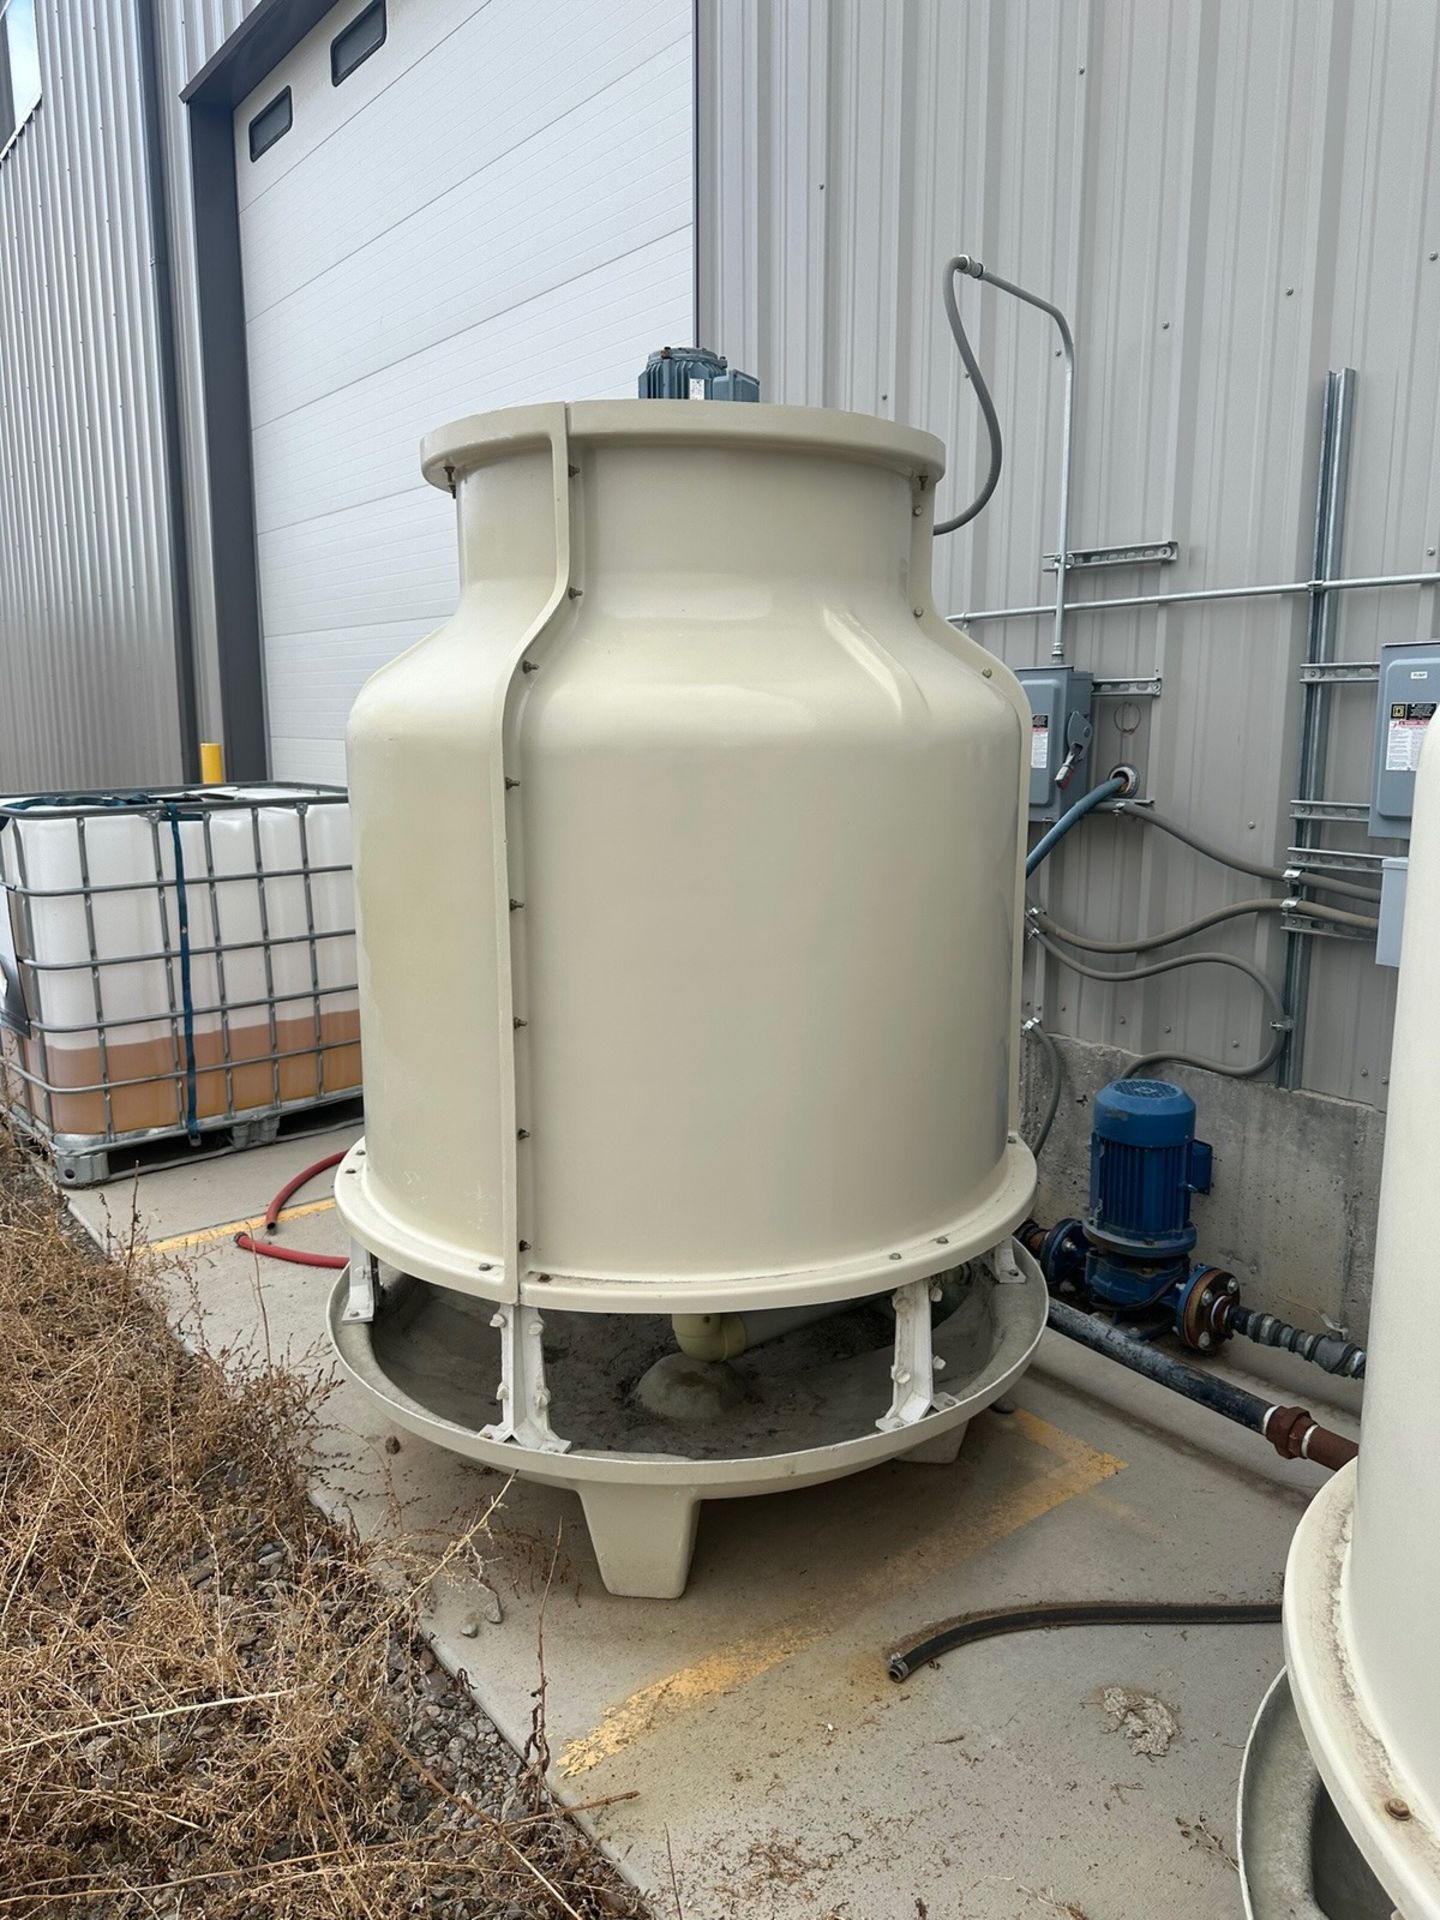 Mini Cooling Tower for Fluid Circulating Water System | Rig Fee $175 - Image 2 of 5